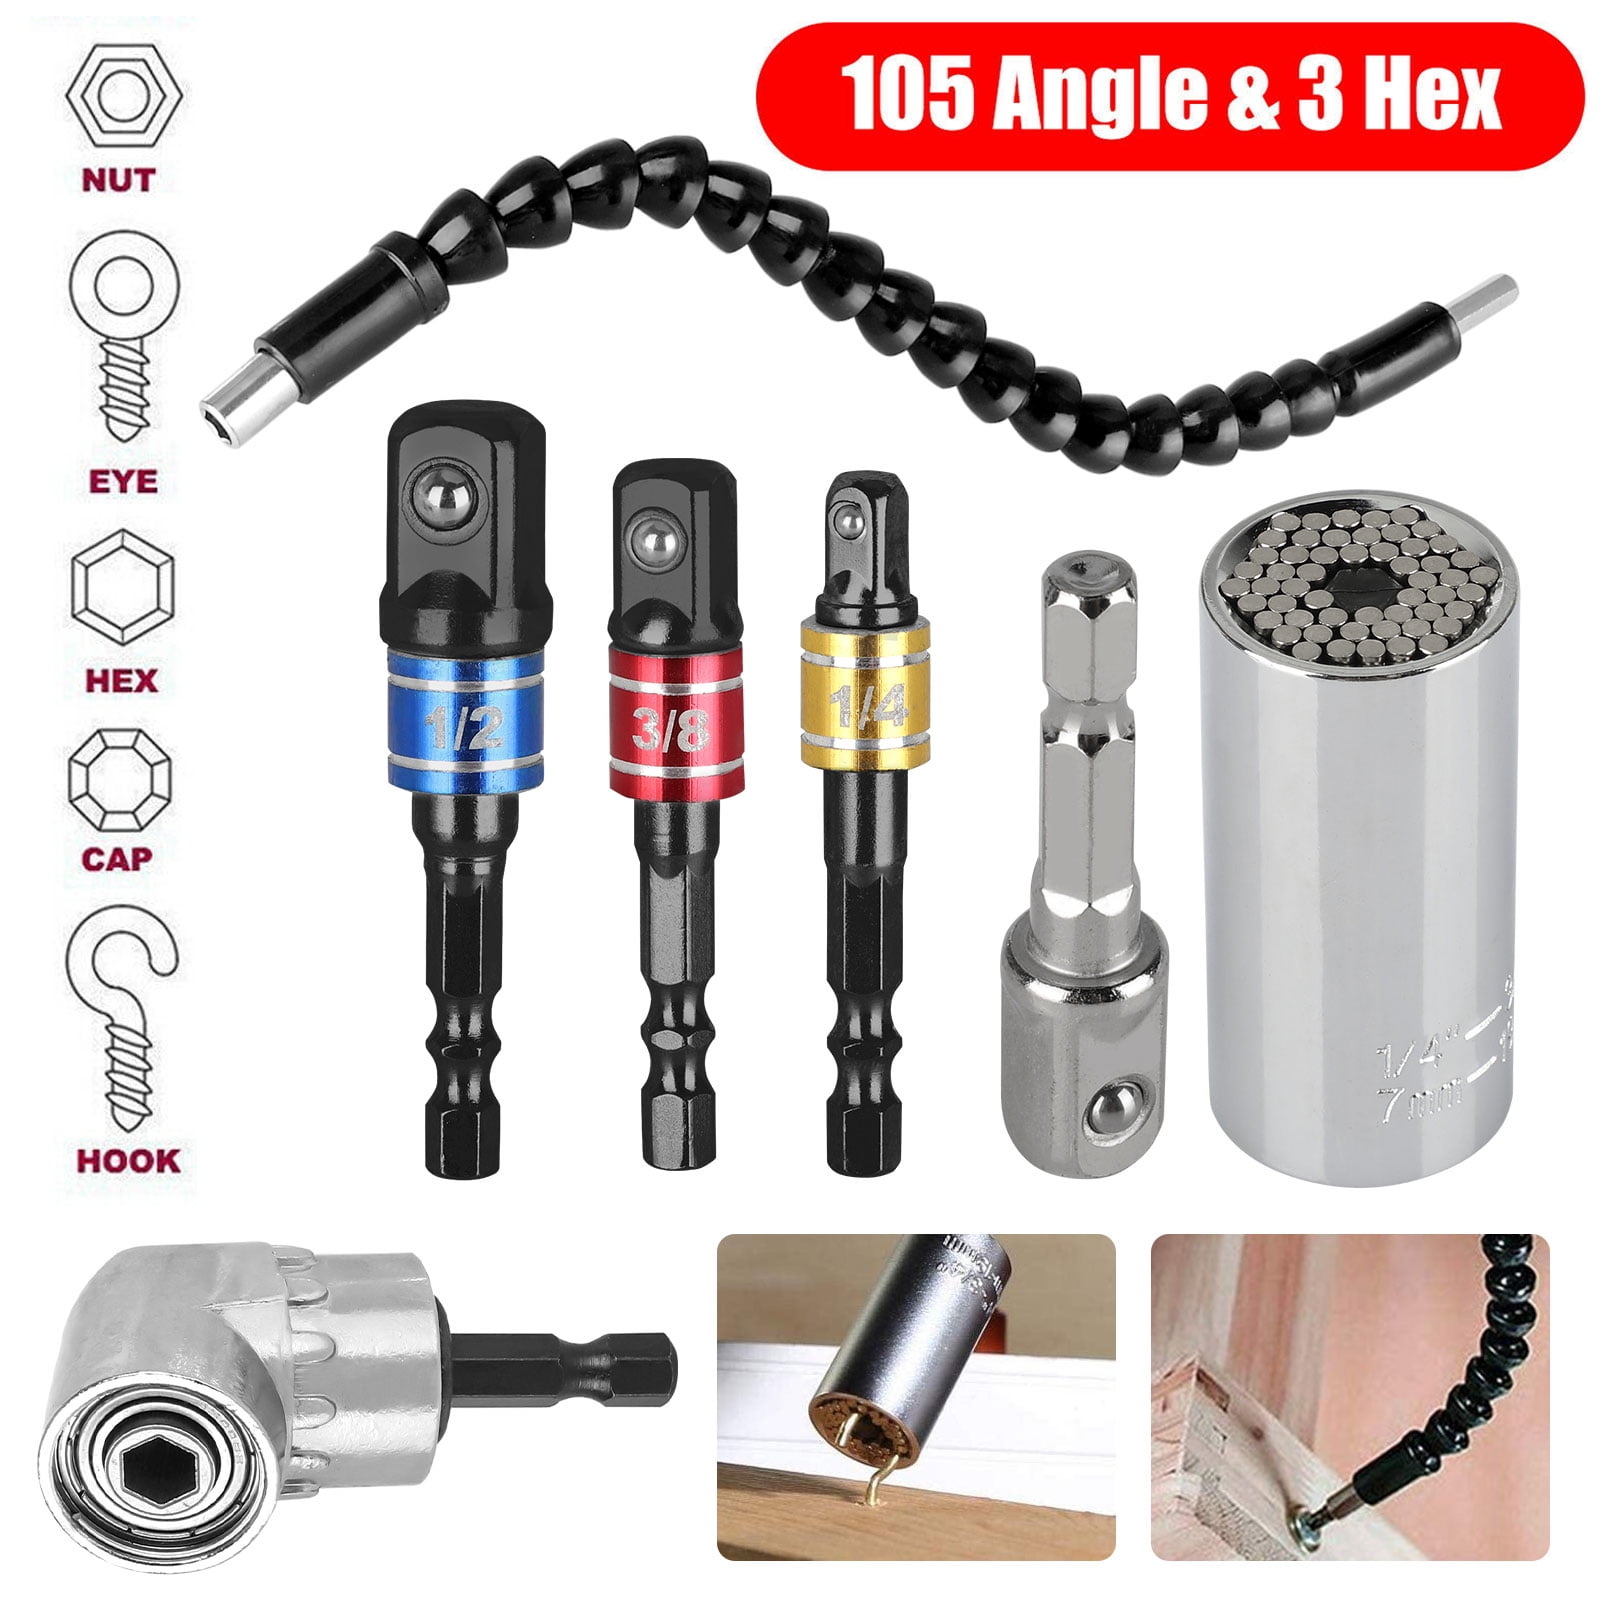 105 Degree Right Angle Driver Screwdriver Power Drill Repair Tool Multifunction Extension Socket Holder Attachment with Magnetic 1/4 Inch Hex Shank Quick Change Drive Adapter